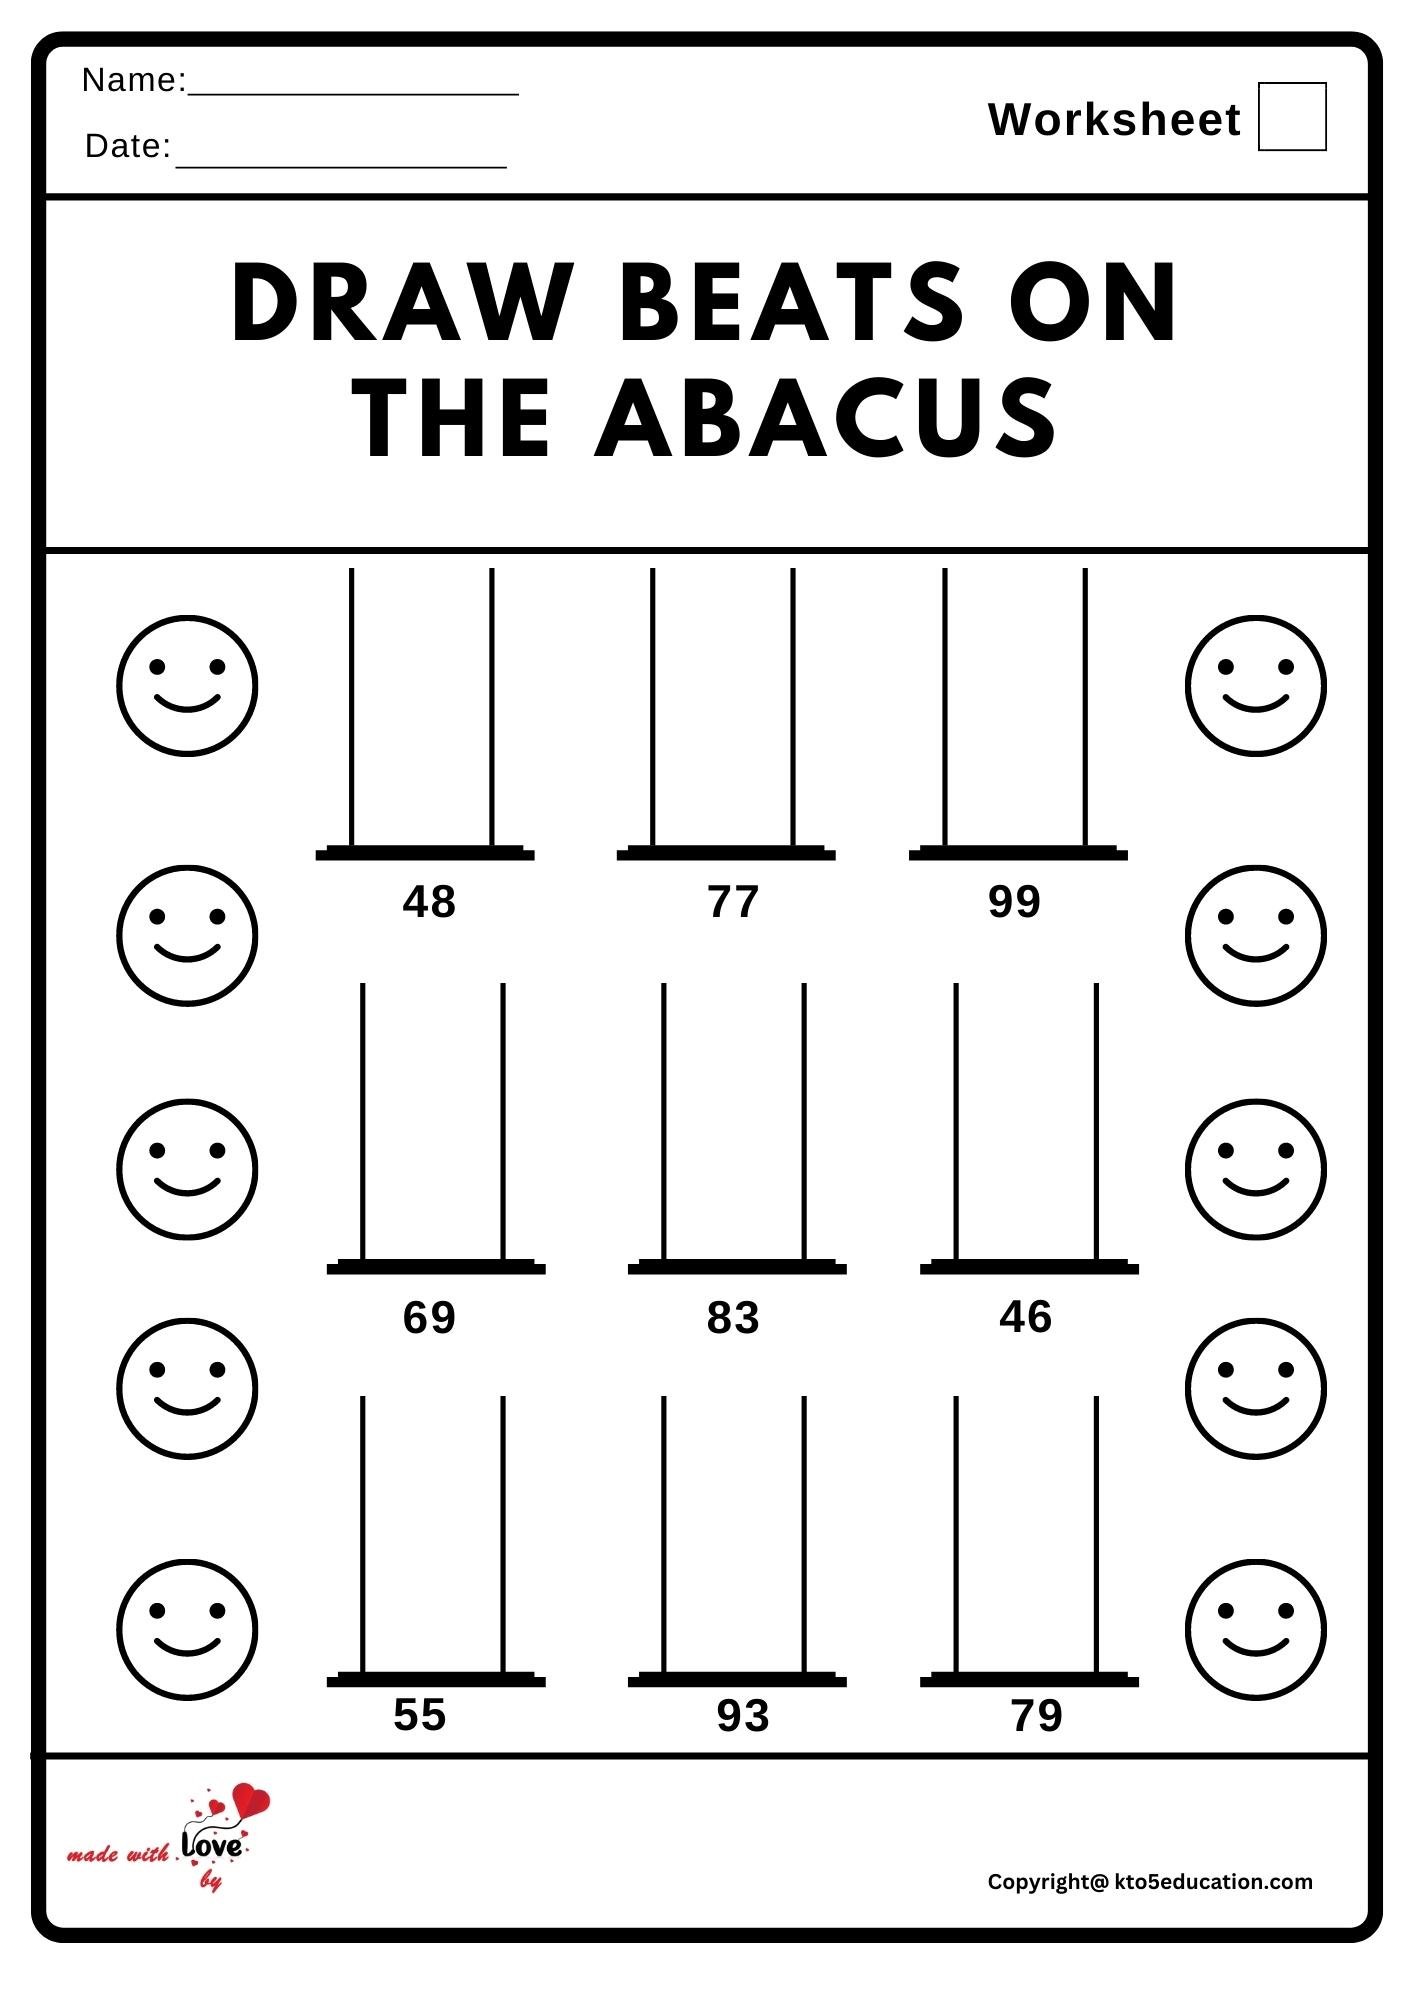 Draw Beats On The Abacas Worksheet 2